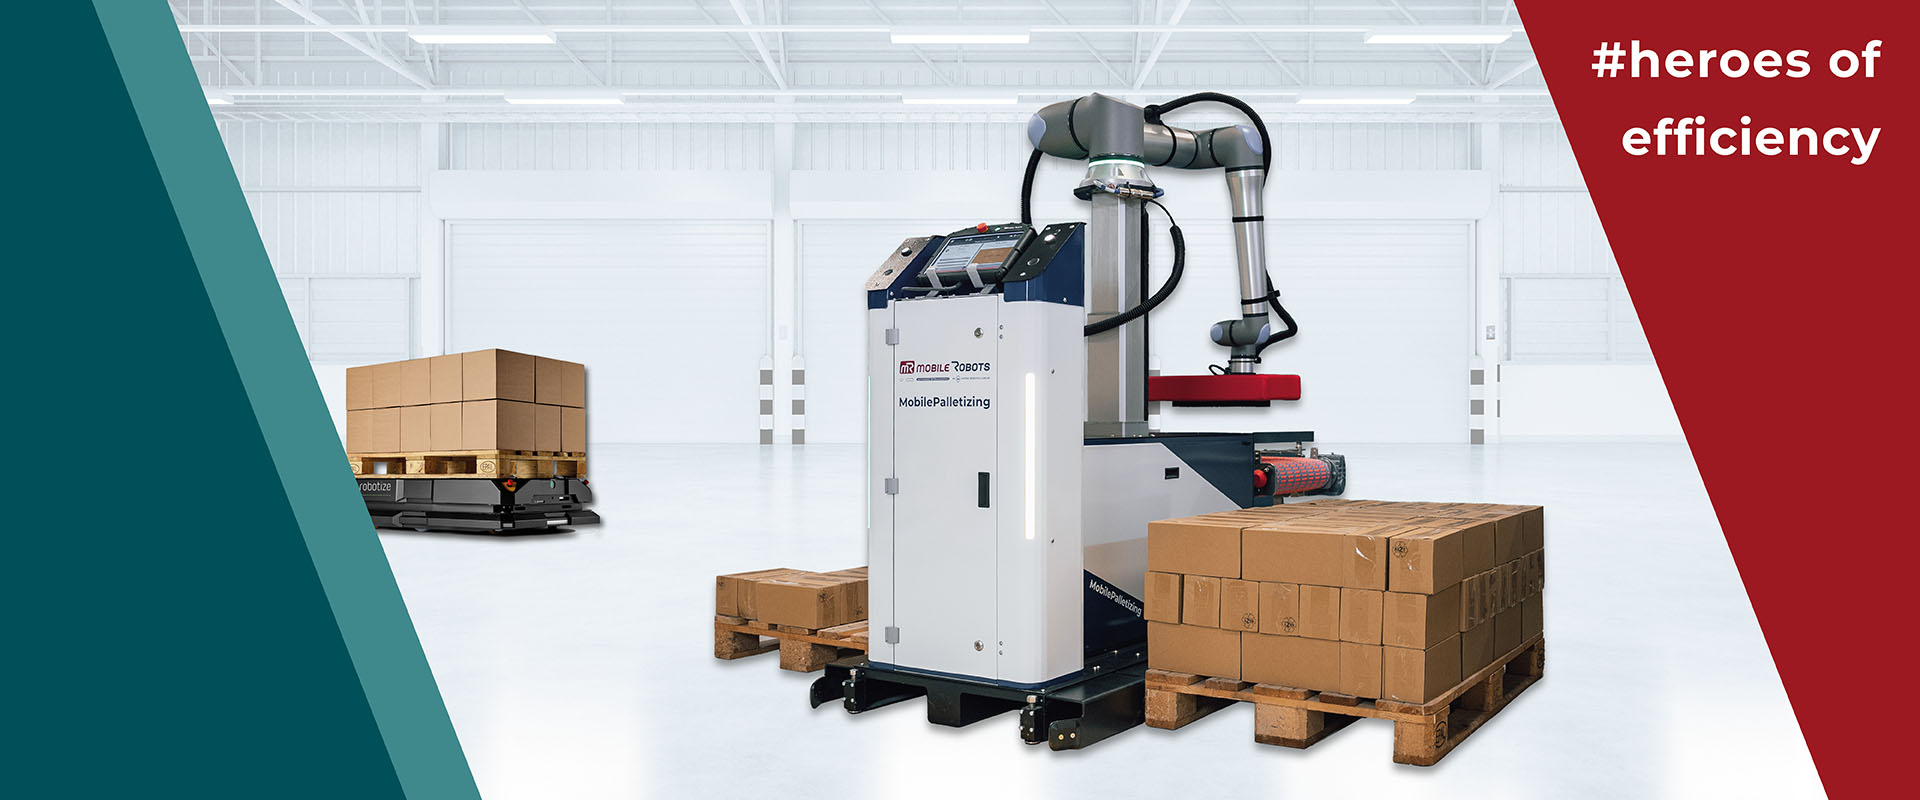 MobilePalletizing rethought: Mobile palletizing with Universal Robots Cobots - by mR MOBILE ROBOTS